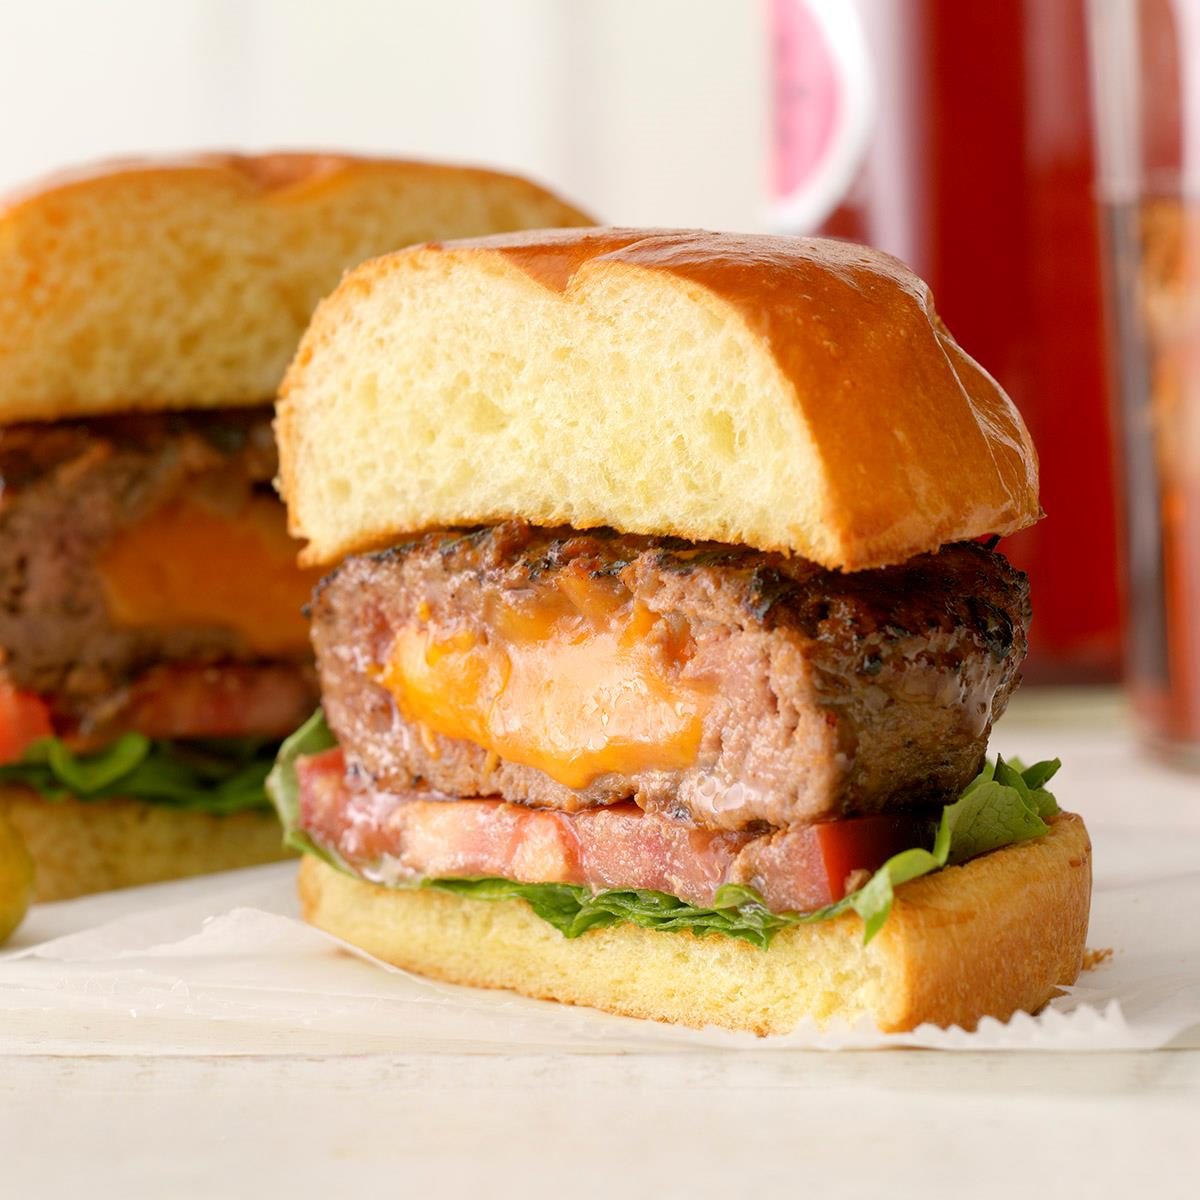 New Hampshire: Cheese-Stuffed Burgers for Two